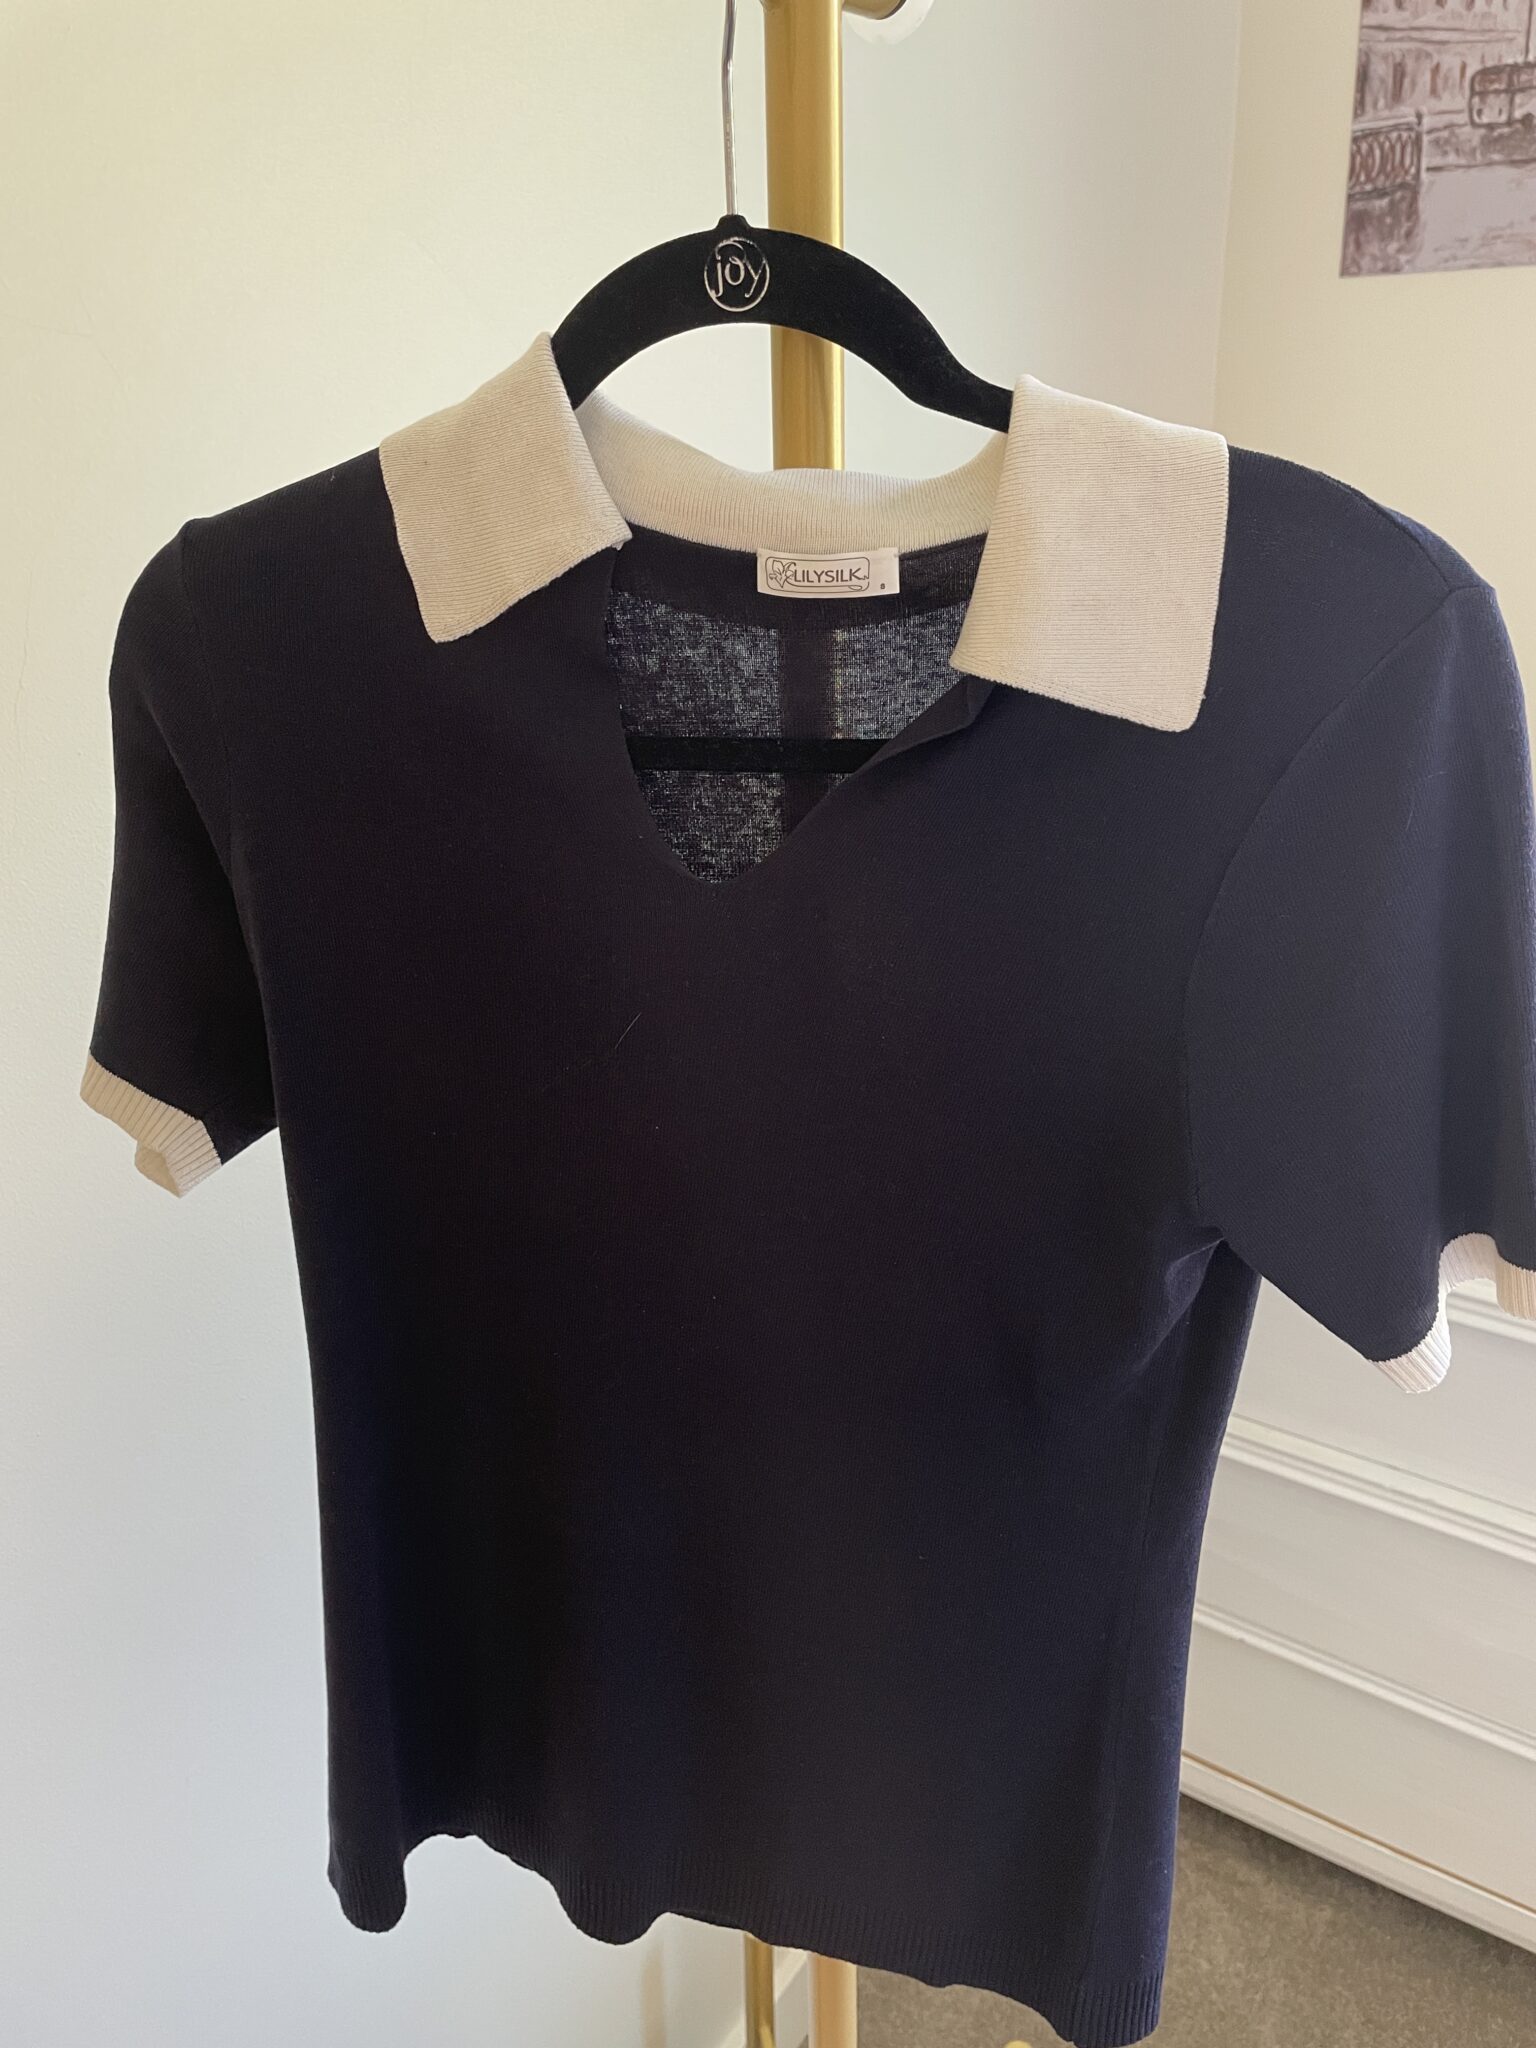 Review of LILYSILK Knit Polo